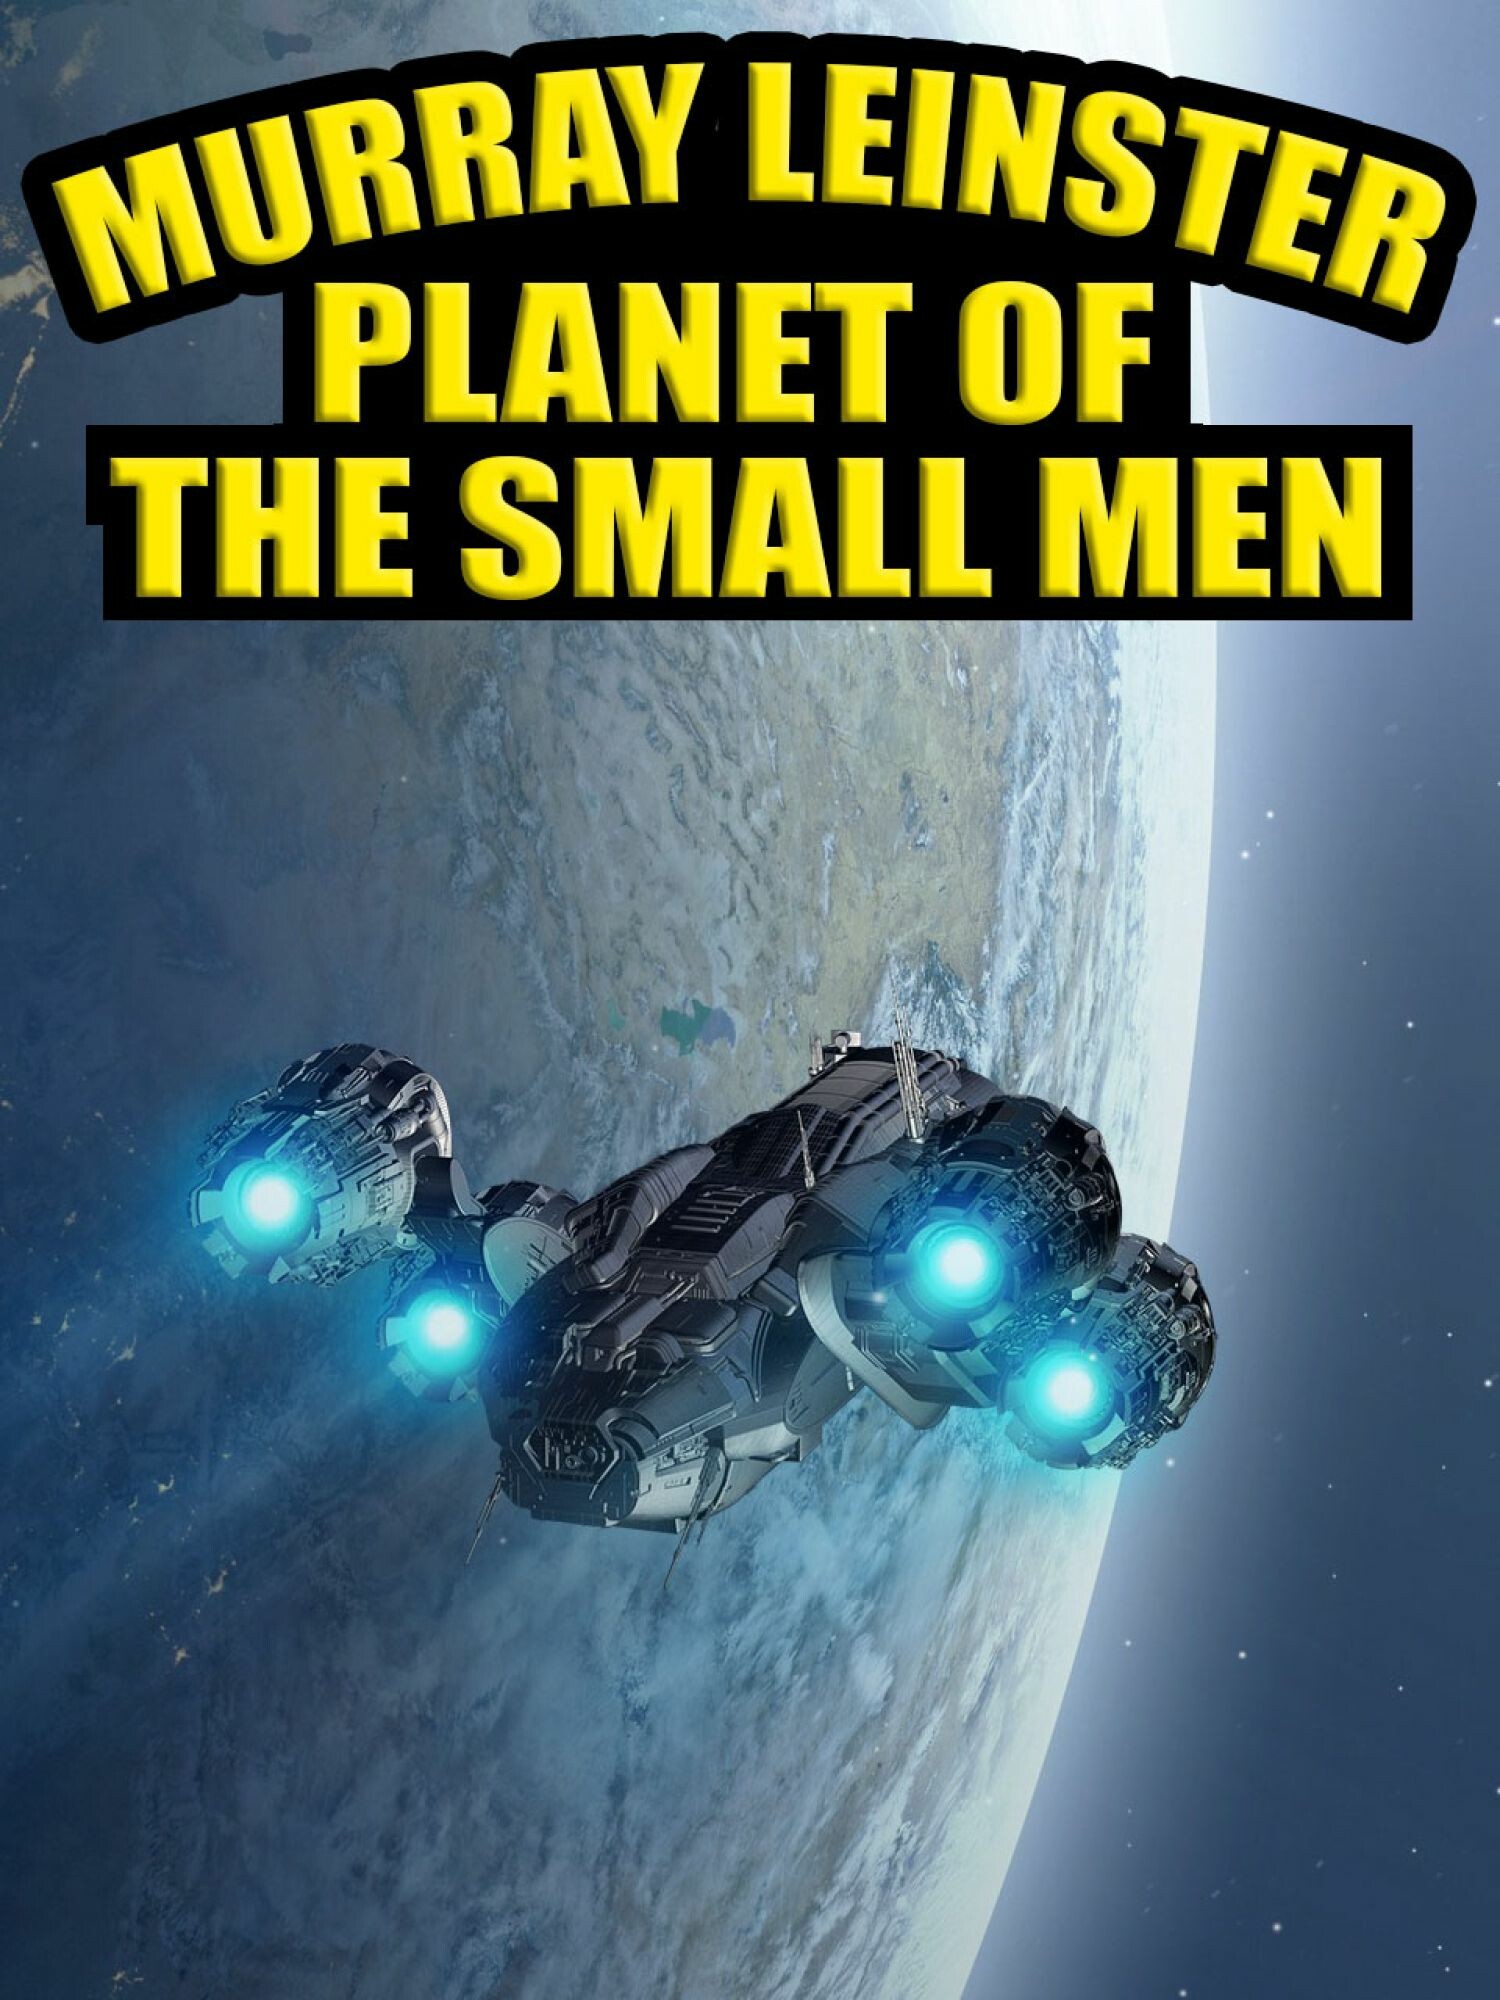 Planet of the Small Men